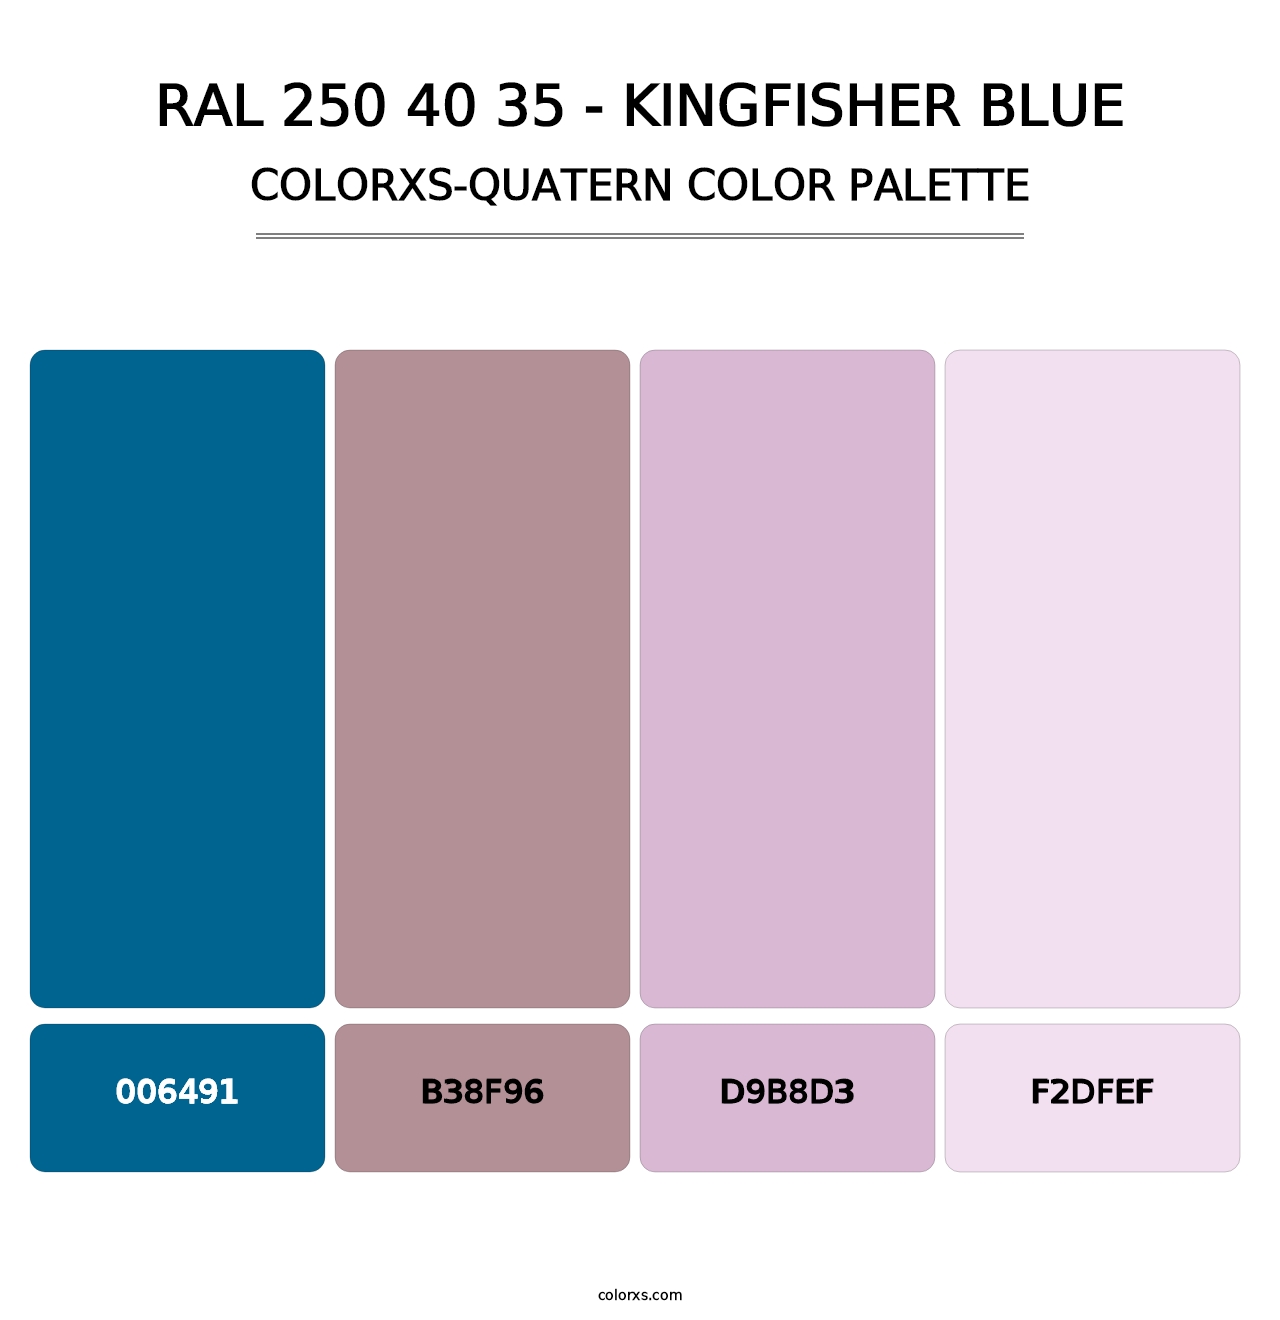 RAL 250 40 35 - Kingfisher Blue - Colorxs Quatern Palette